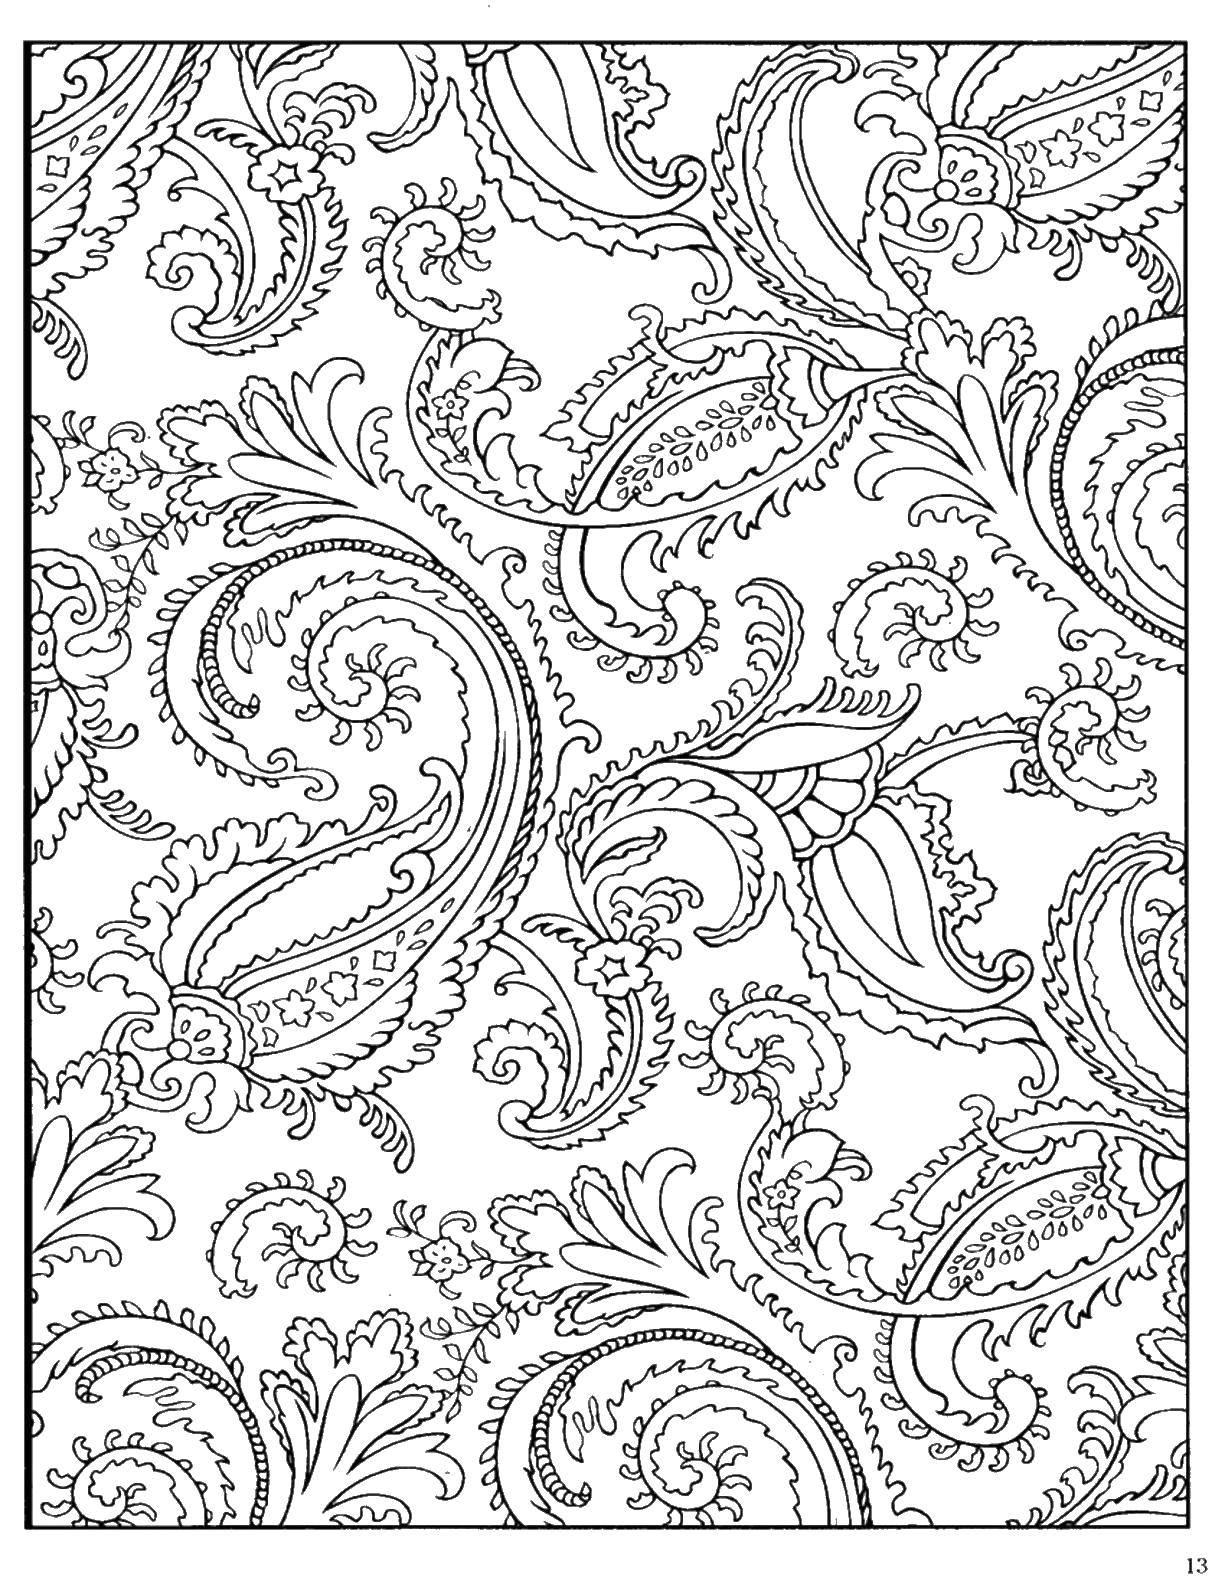 Coloring Coloring antistress with patterns. Category Patterns. Tags:  patterns, anti-stress.